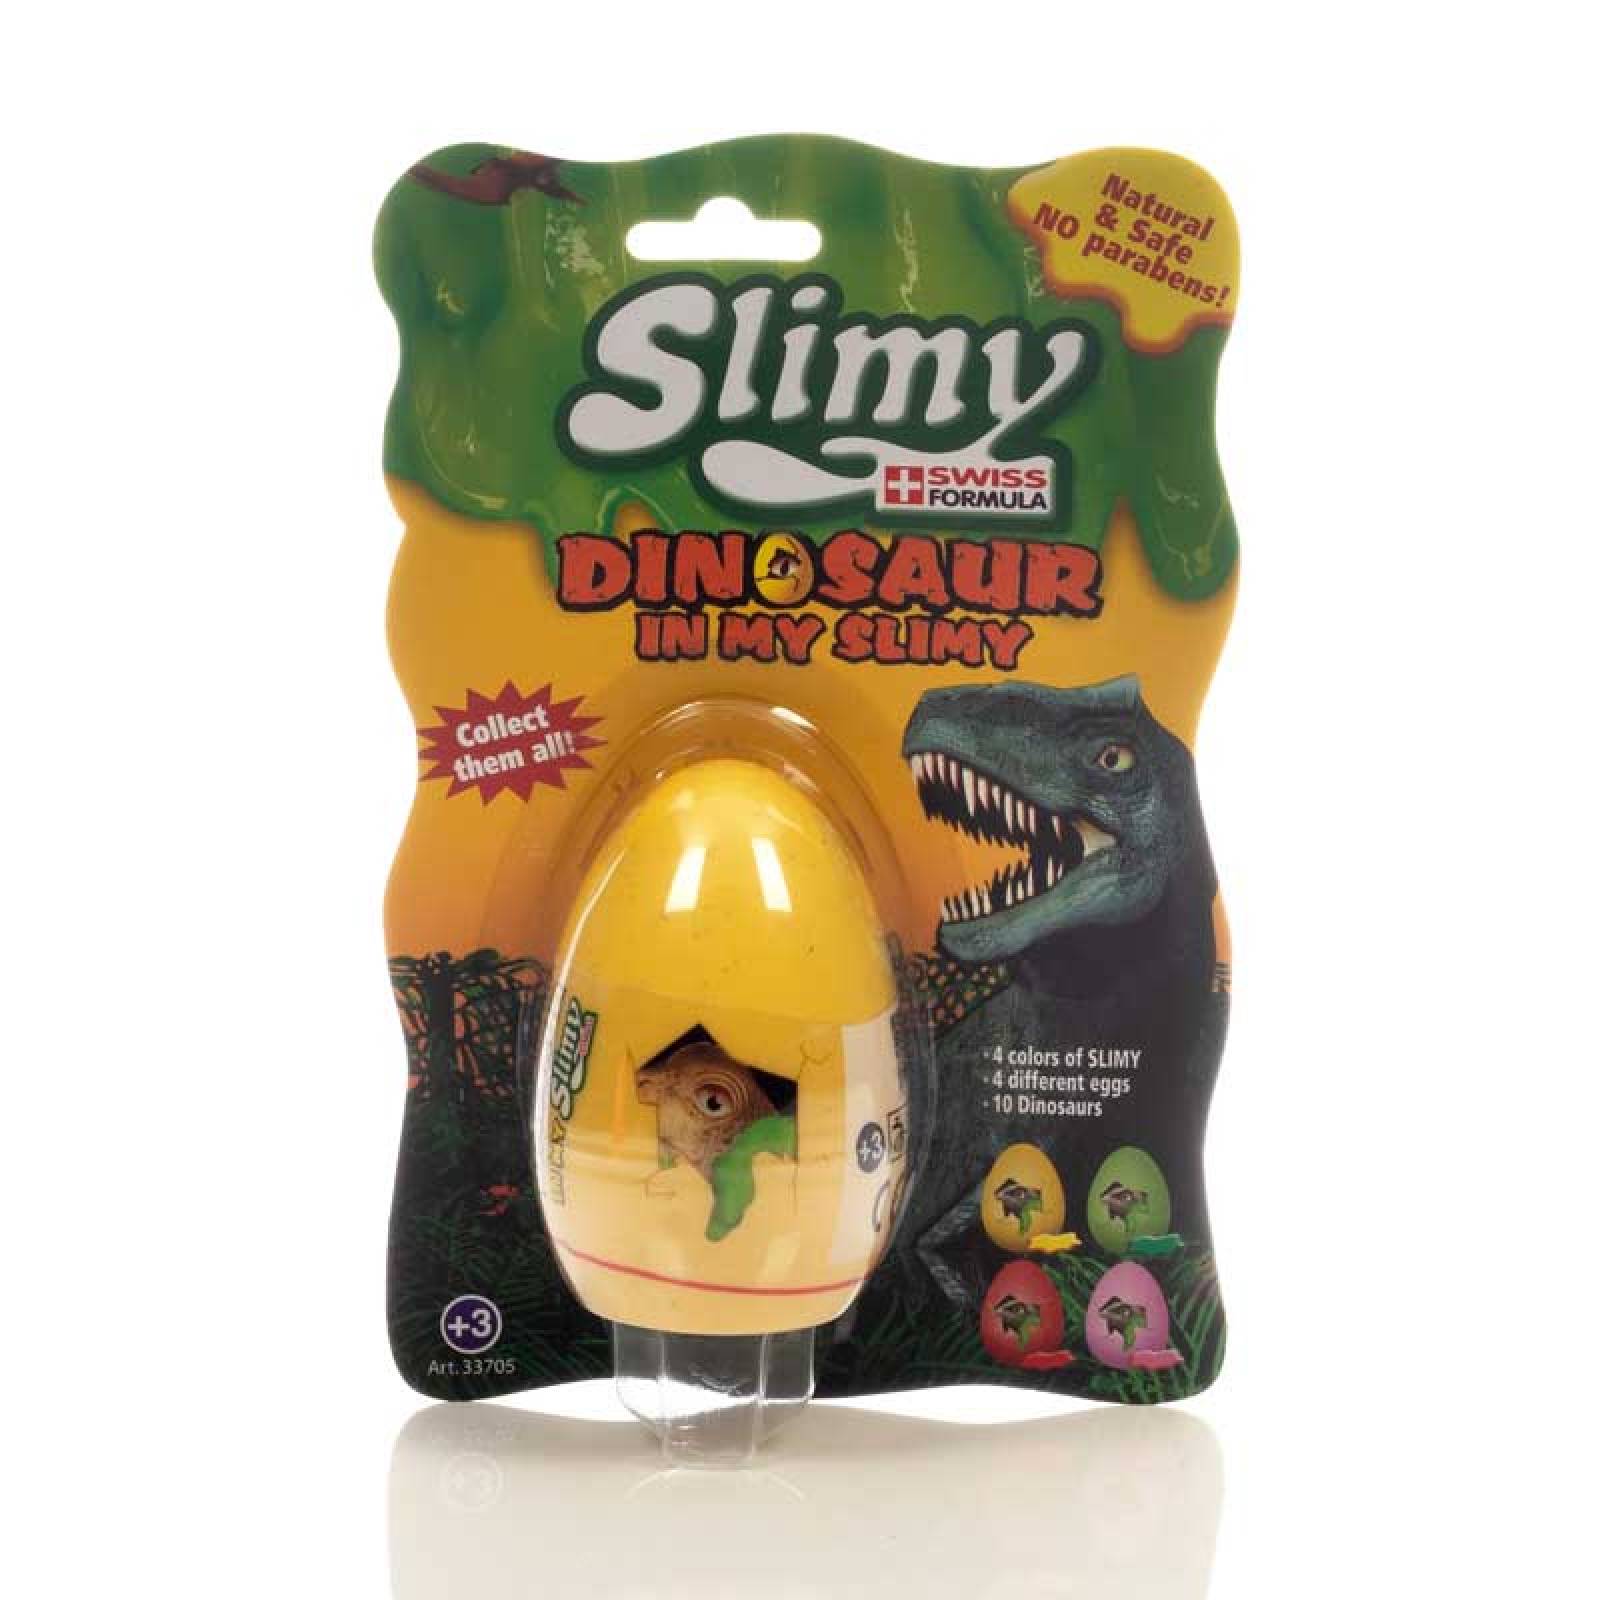 Slime Dinosaur in my Slimy Yellow Formula Suiza